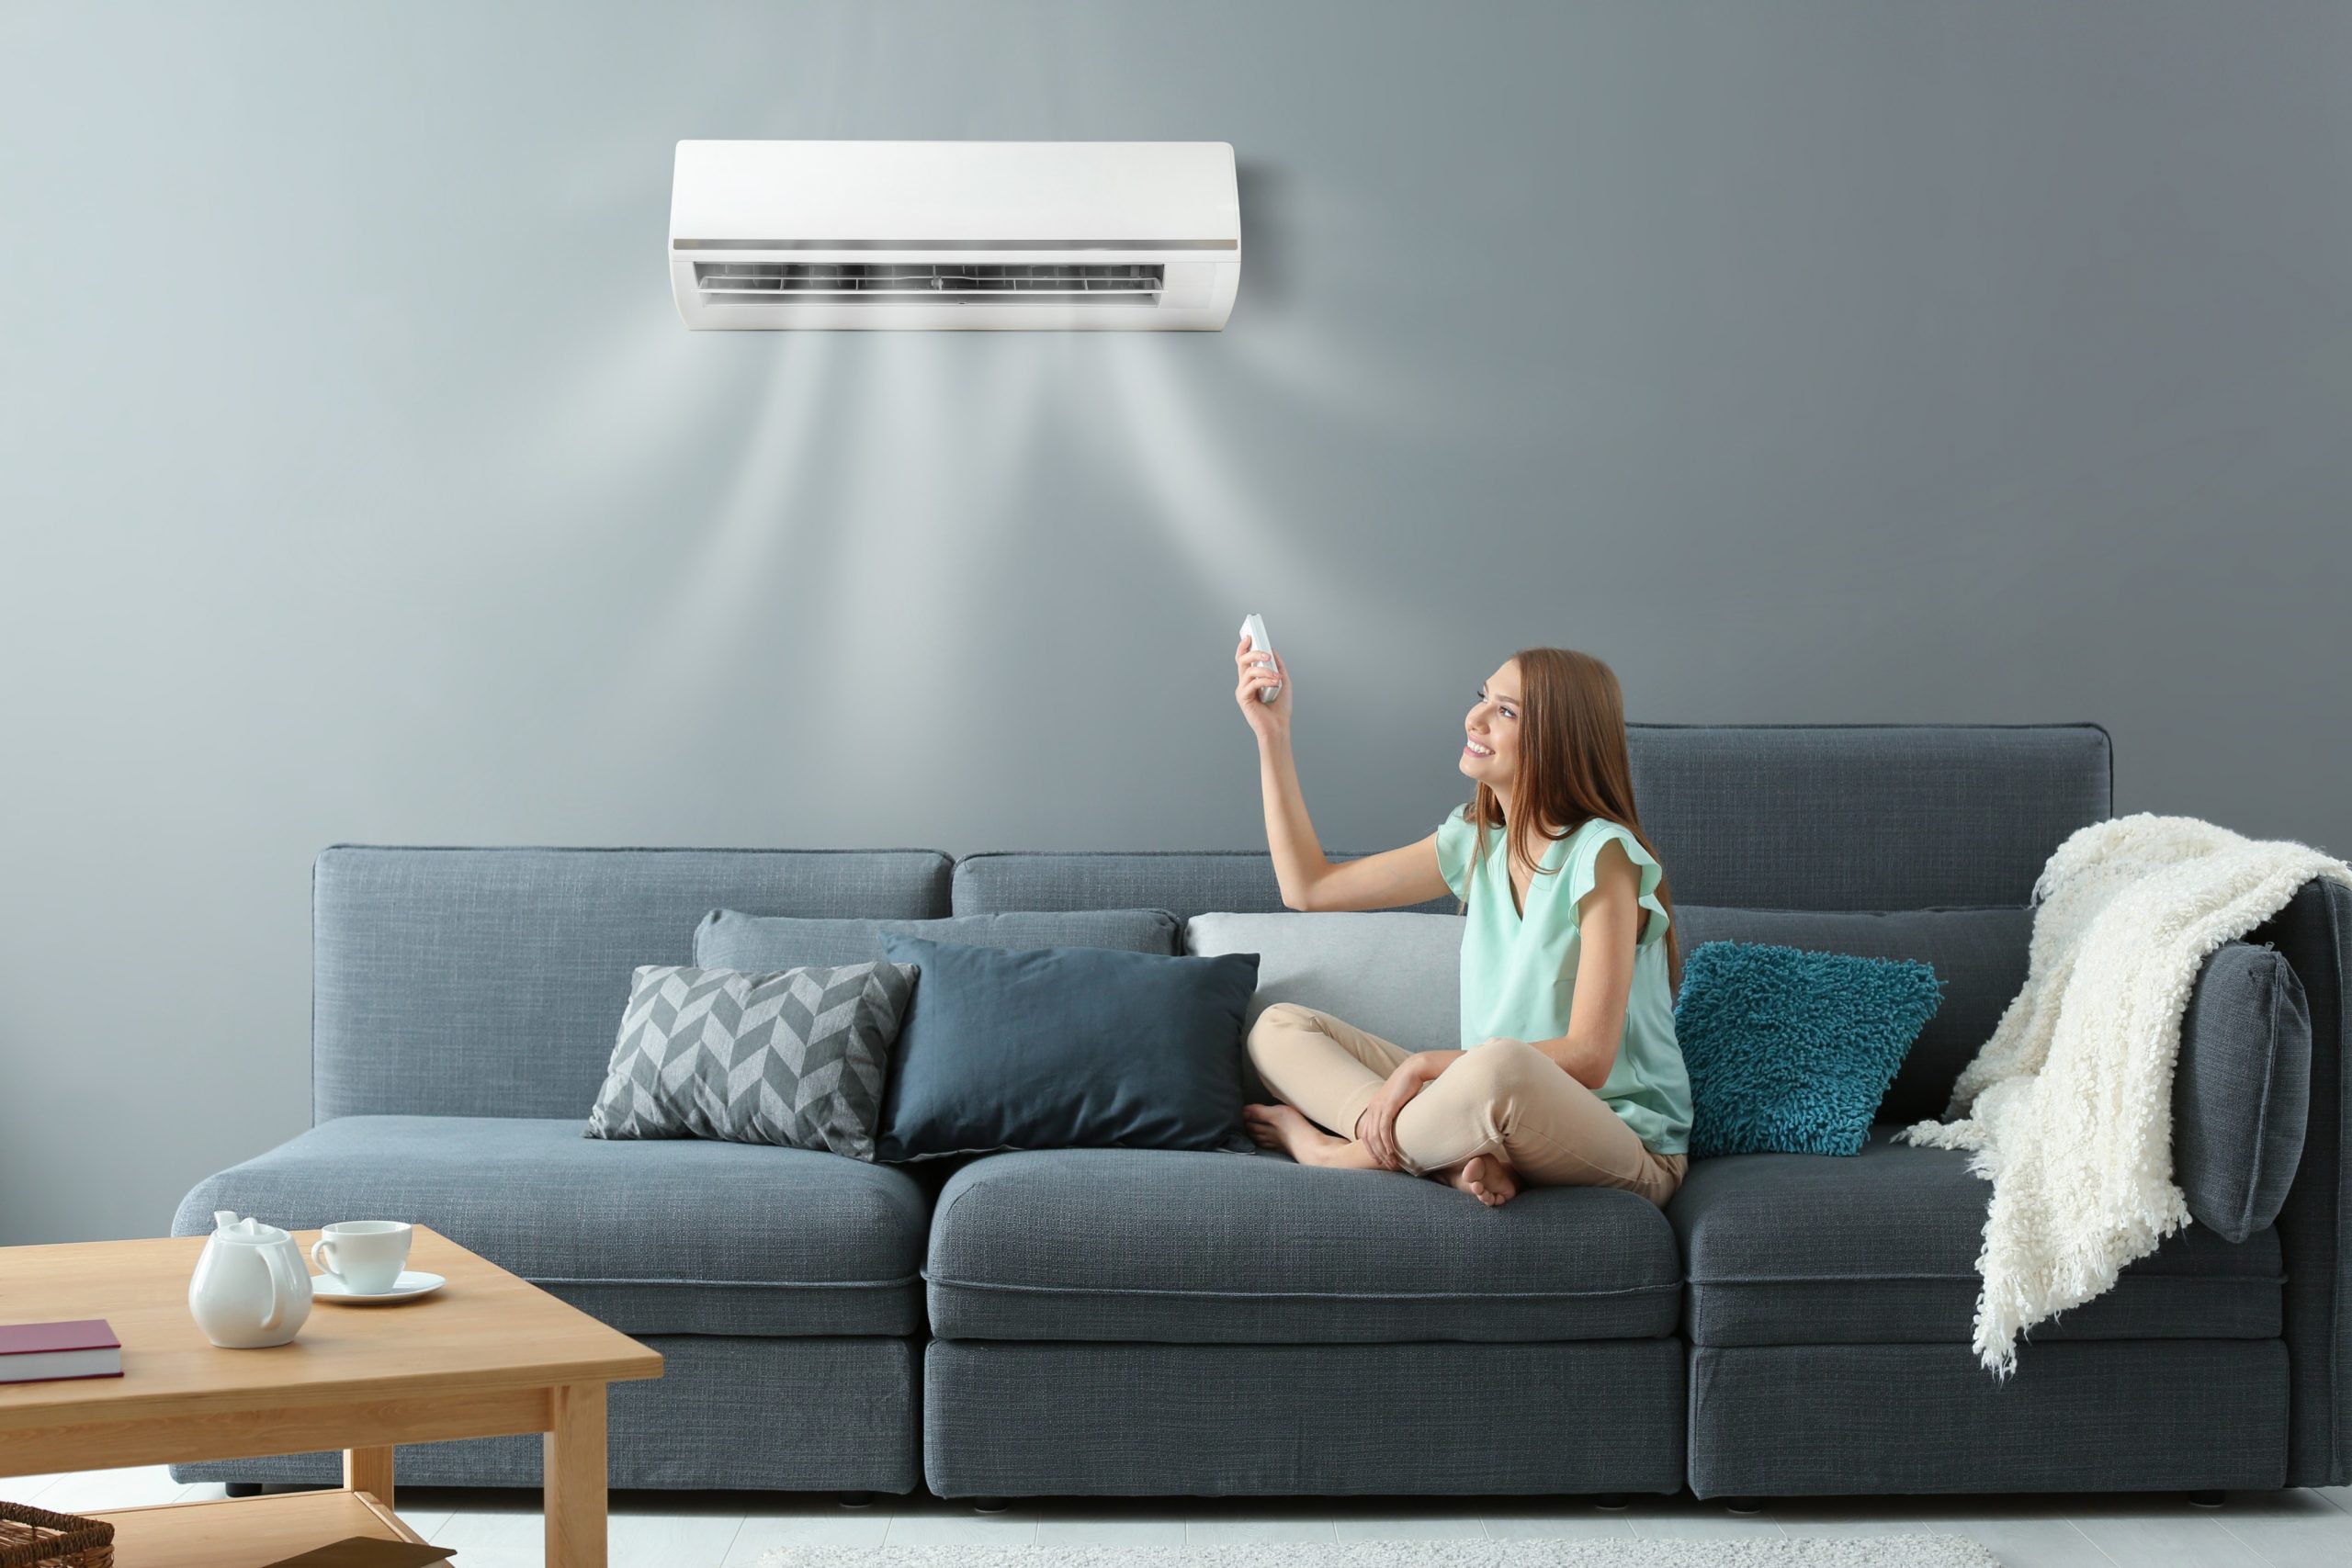 are-there-any-tax-credits-or-rebates-available-for-installing-a-ductless-mini-split-air